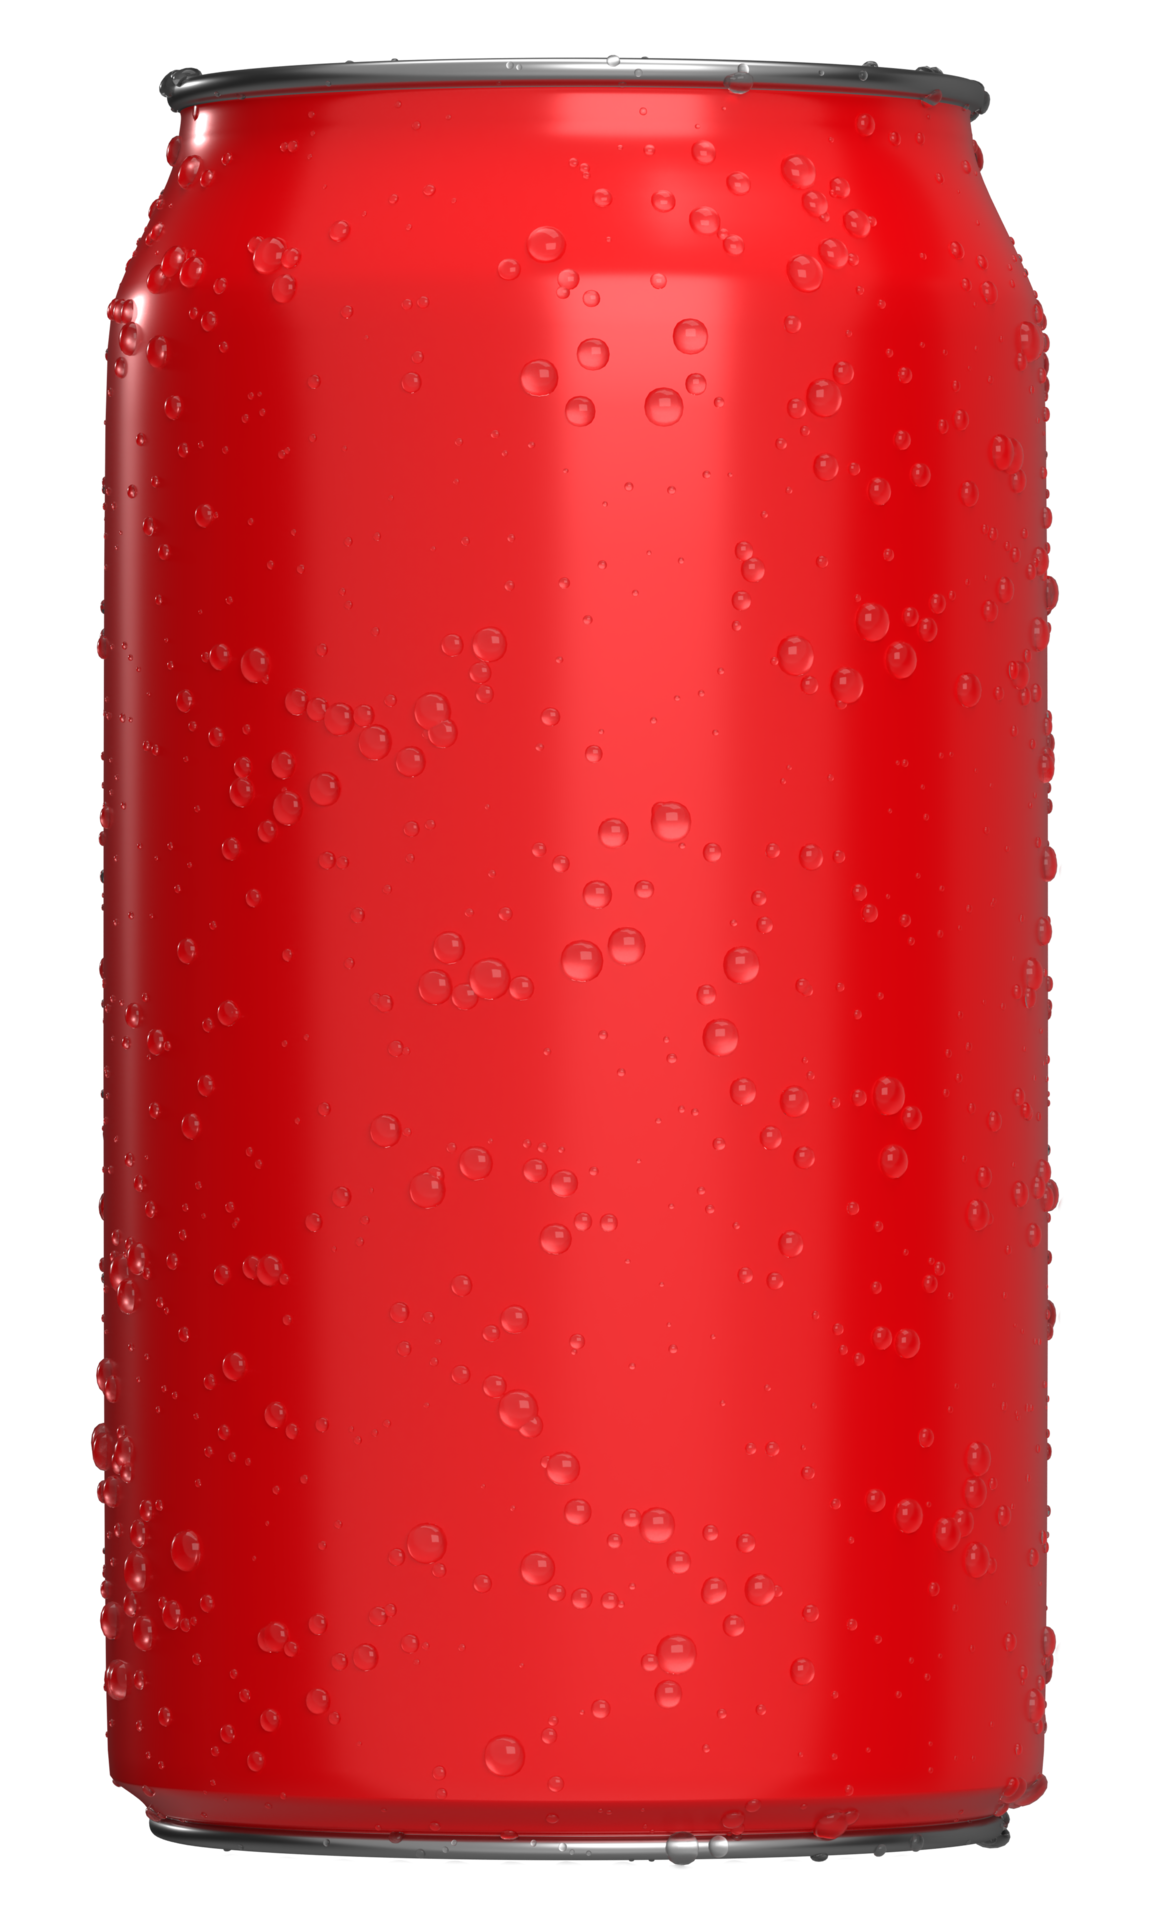 Realistic Cans Red With Water Drops For Mock Up Soda Can Mock Up